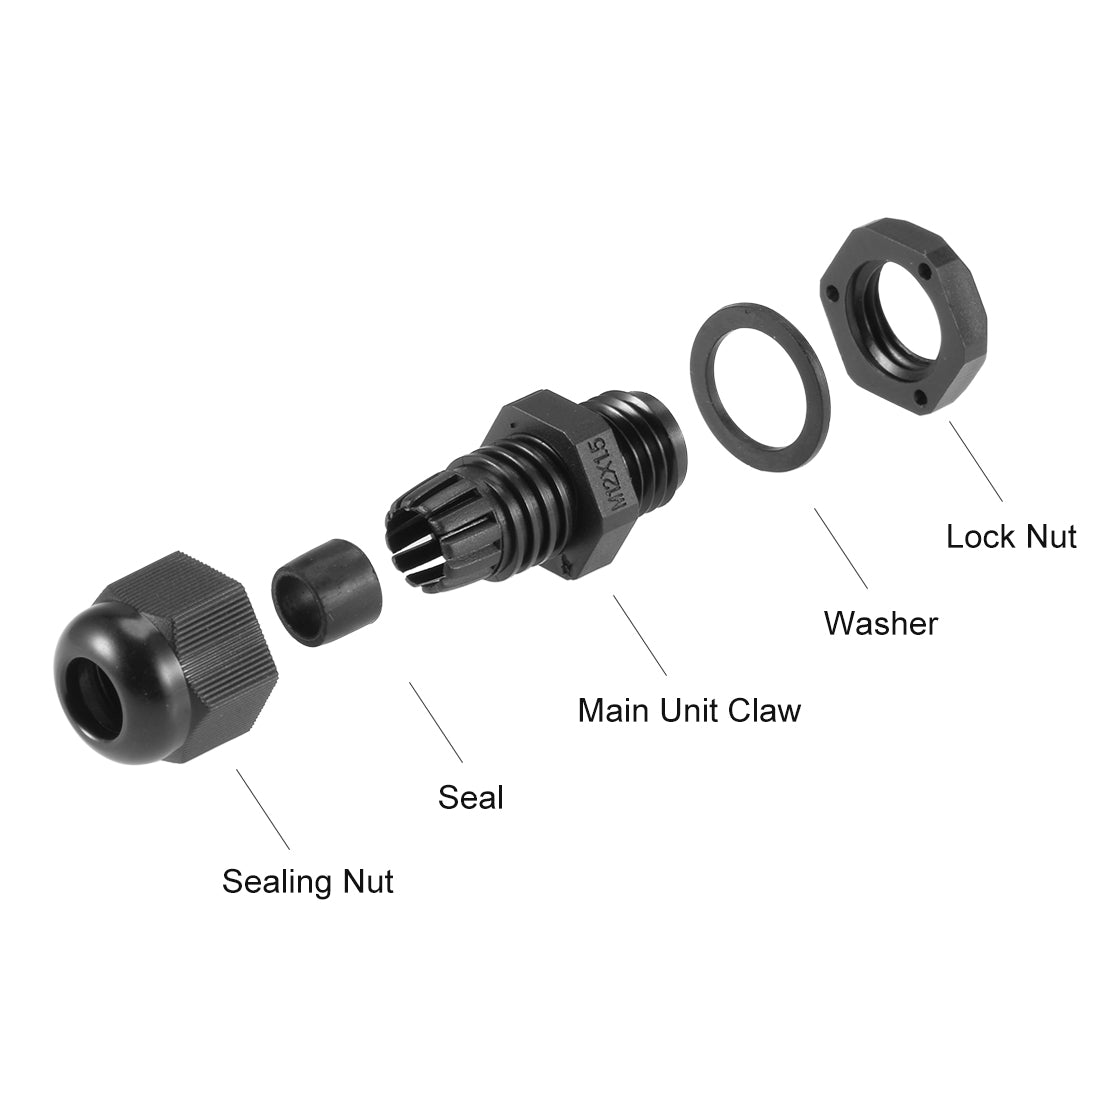 uxcell Uxcell M12x1.5 Cable Gland 2mm-5mm Wire Hole Waterproof Nylon Joint Adjustable Locknut with Washer Black 20pcs